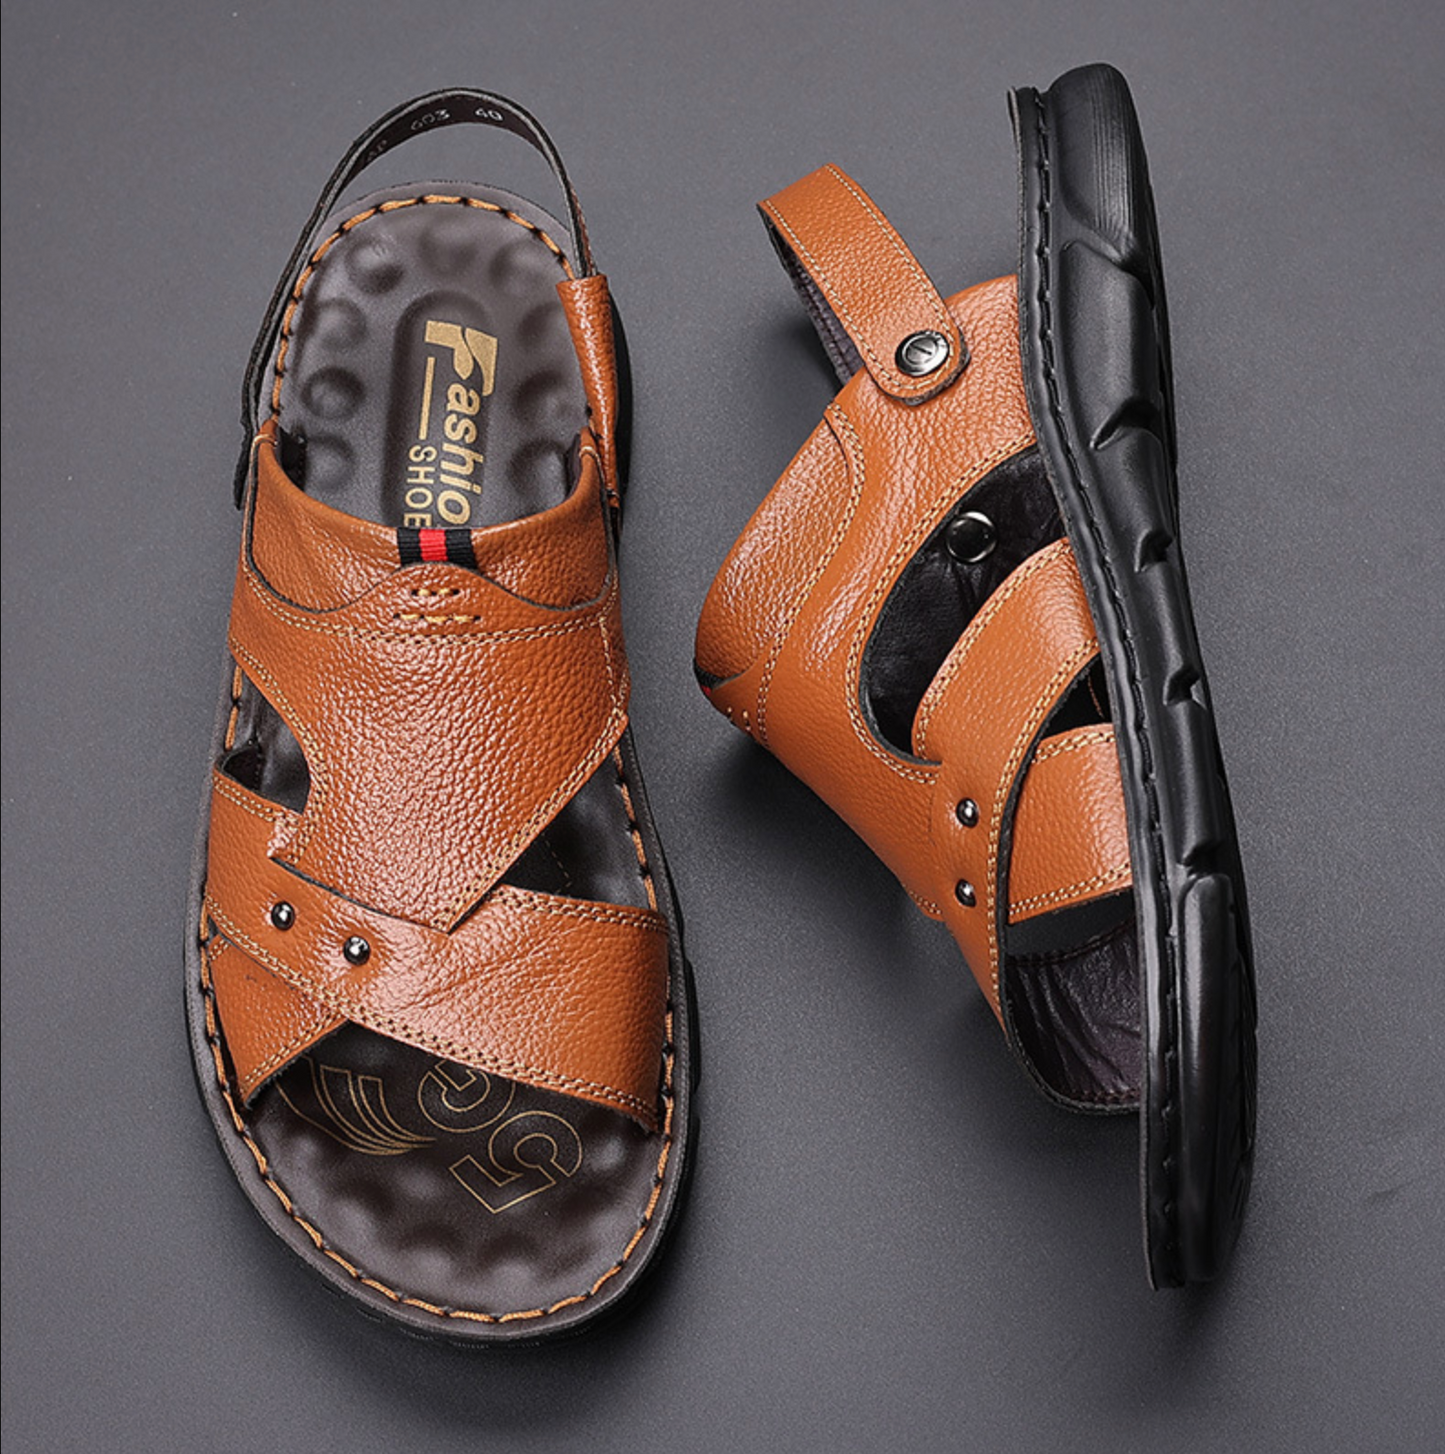 Men Sandals Beach Shoes Outer Sandals Slippers